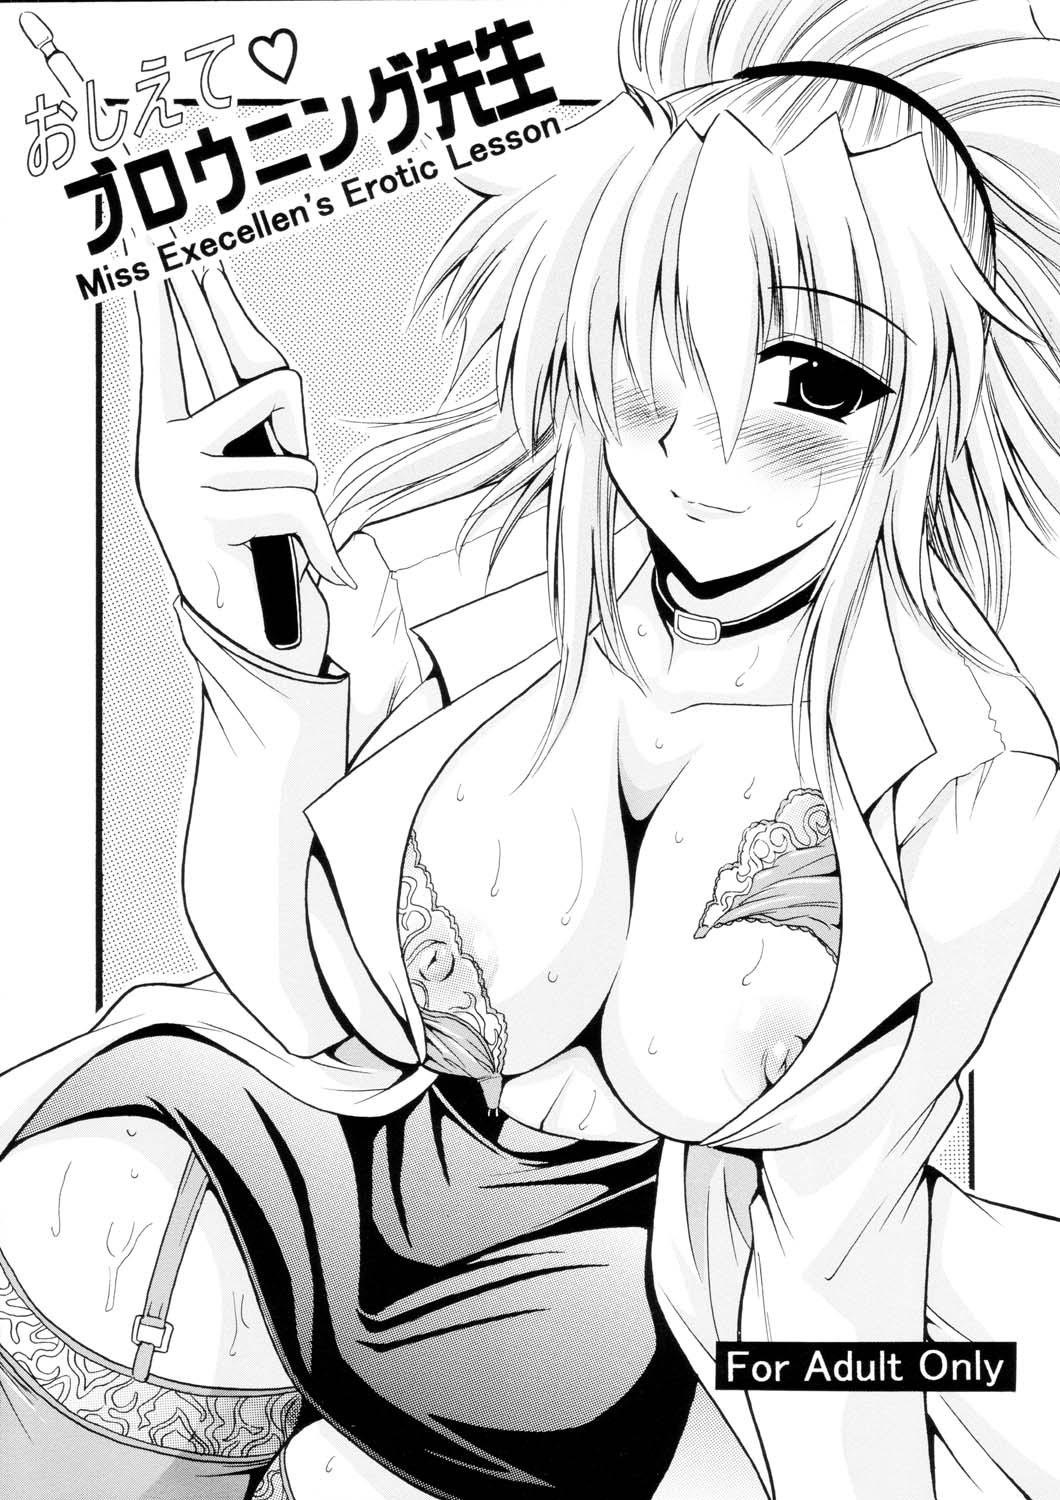 White Girl Oshiete Browning Sensei - Miss Execellen's Erotic Lesson - Super robot wars Panty - Page 1